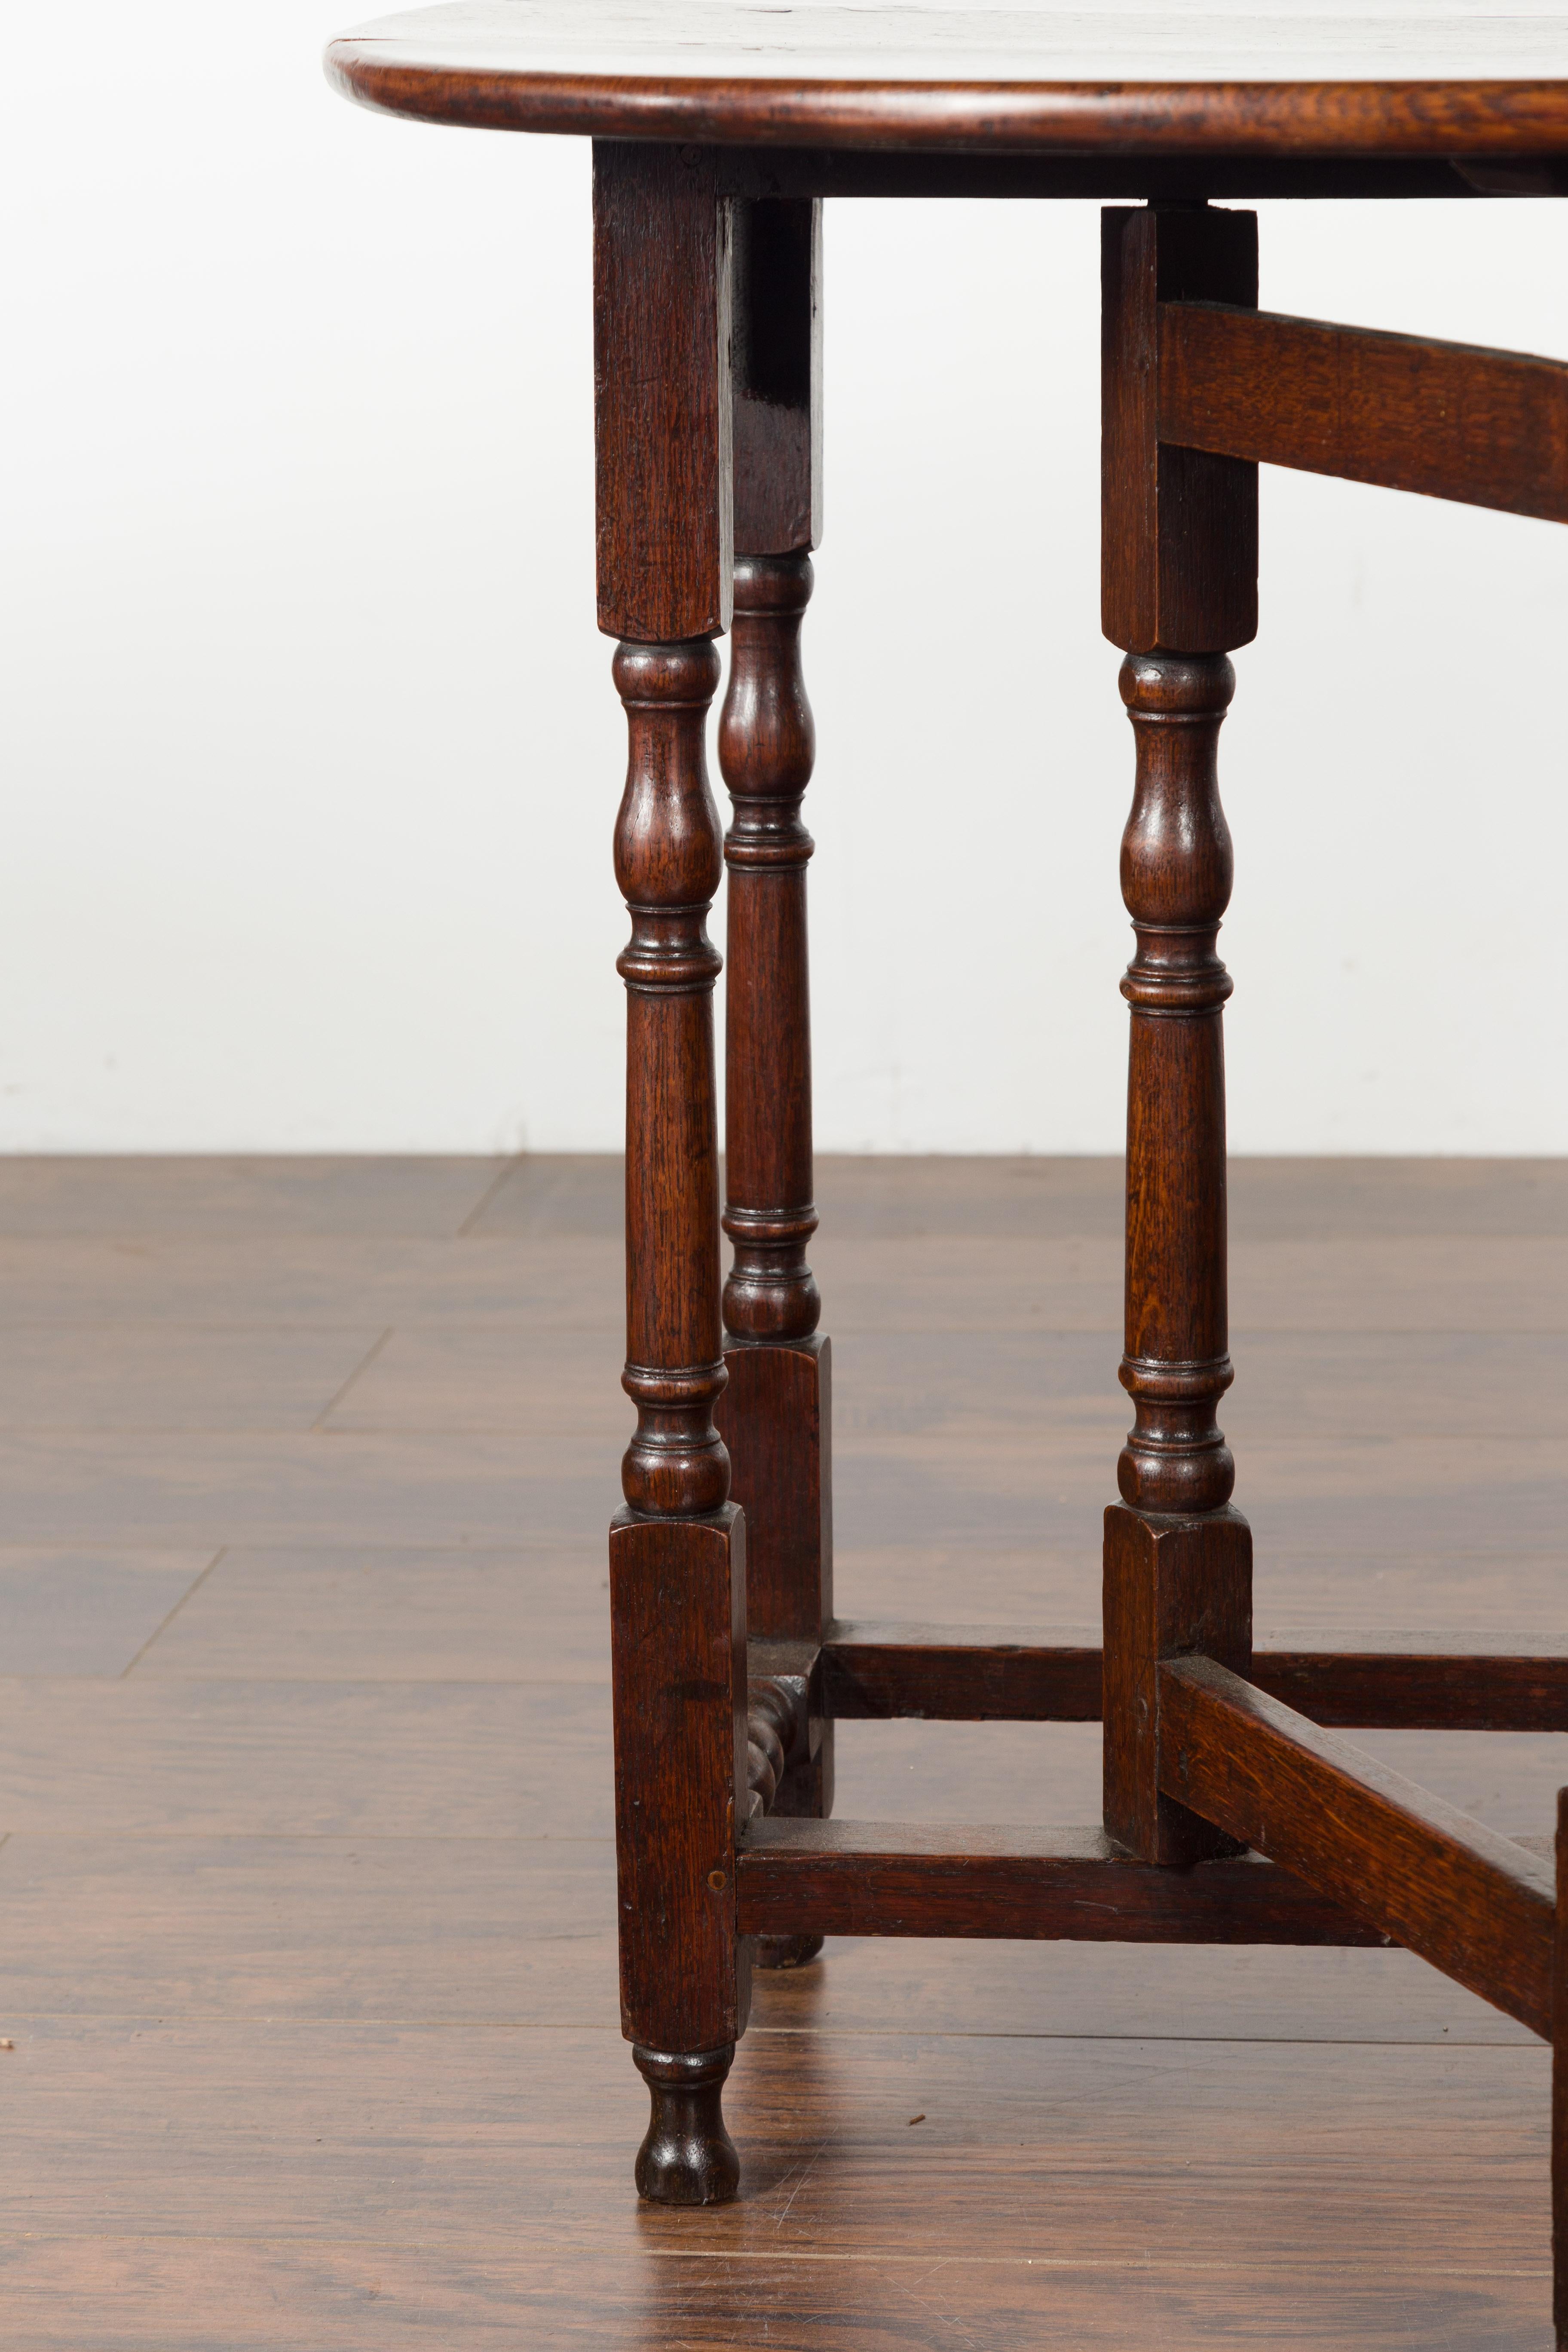 Petite English Oval Oak 19th Century Drop-Leaf Table with Baluster Legs For Sale 10